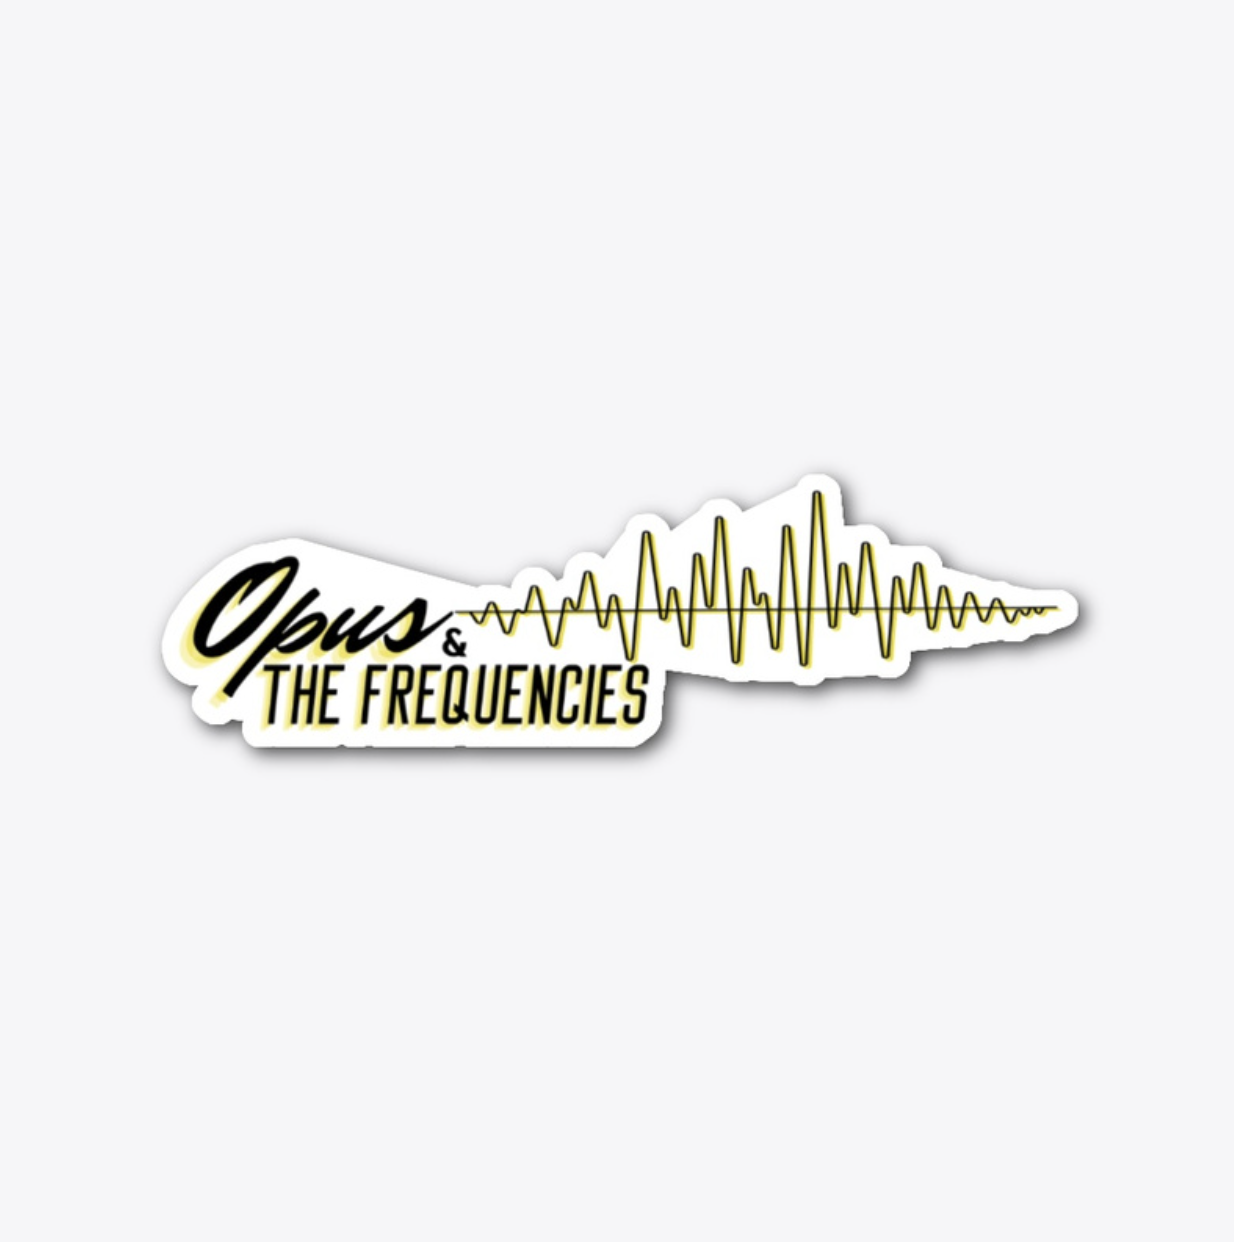 Opus &amp; The Frequencies Sticker